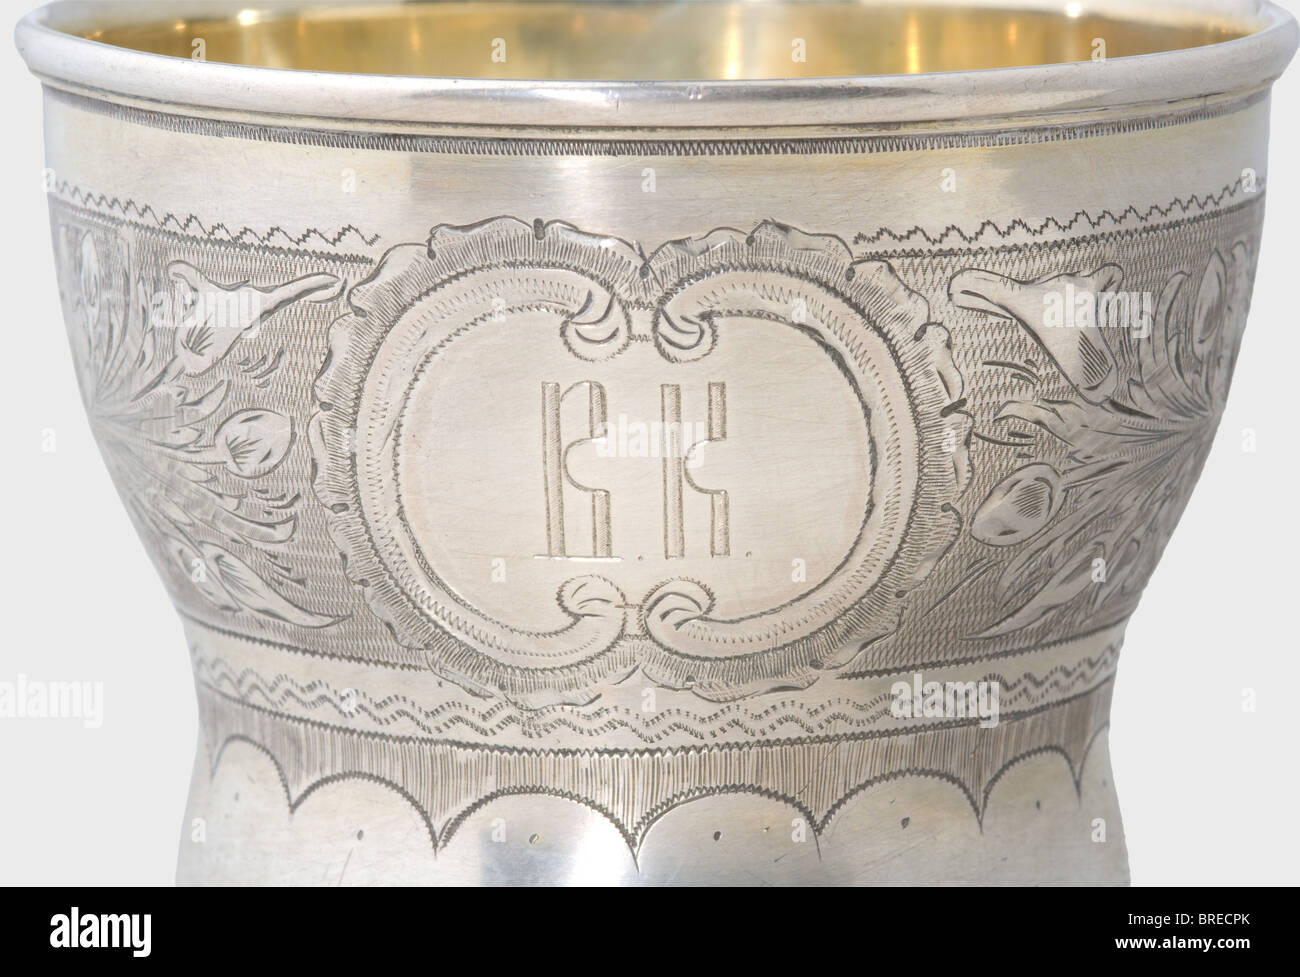 A silver tea cup and saucer, Moscow, 1867. Silver, gilt in places and with delicate floral engraving. The cup displays the monogram 'V.K.' in front. Each piece bears the master's mark, 'NA', the Moscow hallmark for '84' zolotniki, the inspecting master's mark 'BC', and the year '1867' on the bottom. Height of the cup 8.5 cm. Diameter of the saucer 13.5 cm. Total weight 199 g. Provenance: Grand Duchess Vera Konstantinovna Romanova (1854 - 1912). historic, historical, 19th century, dish, dishes, cup, cups, object, objects, stills, clipping, clippings, cut out, cu, Stock Photo